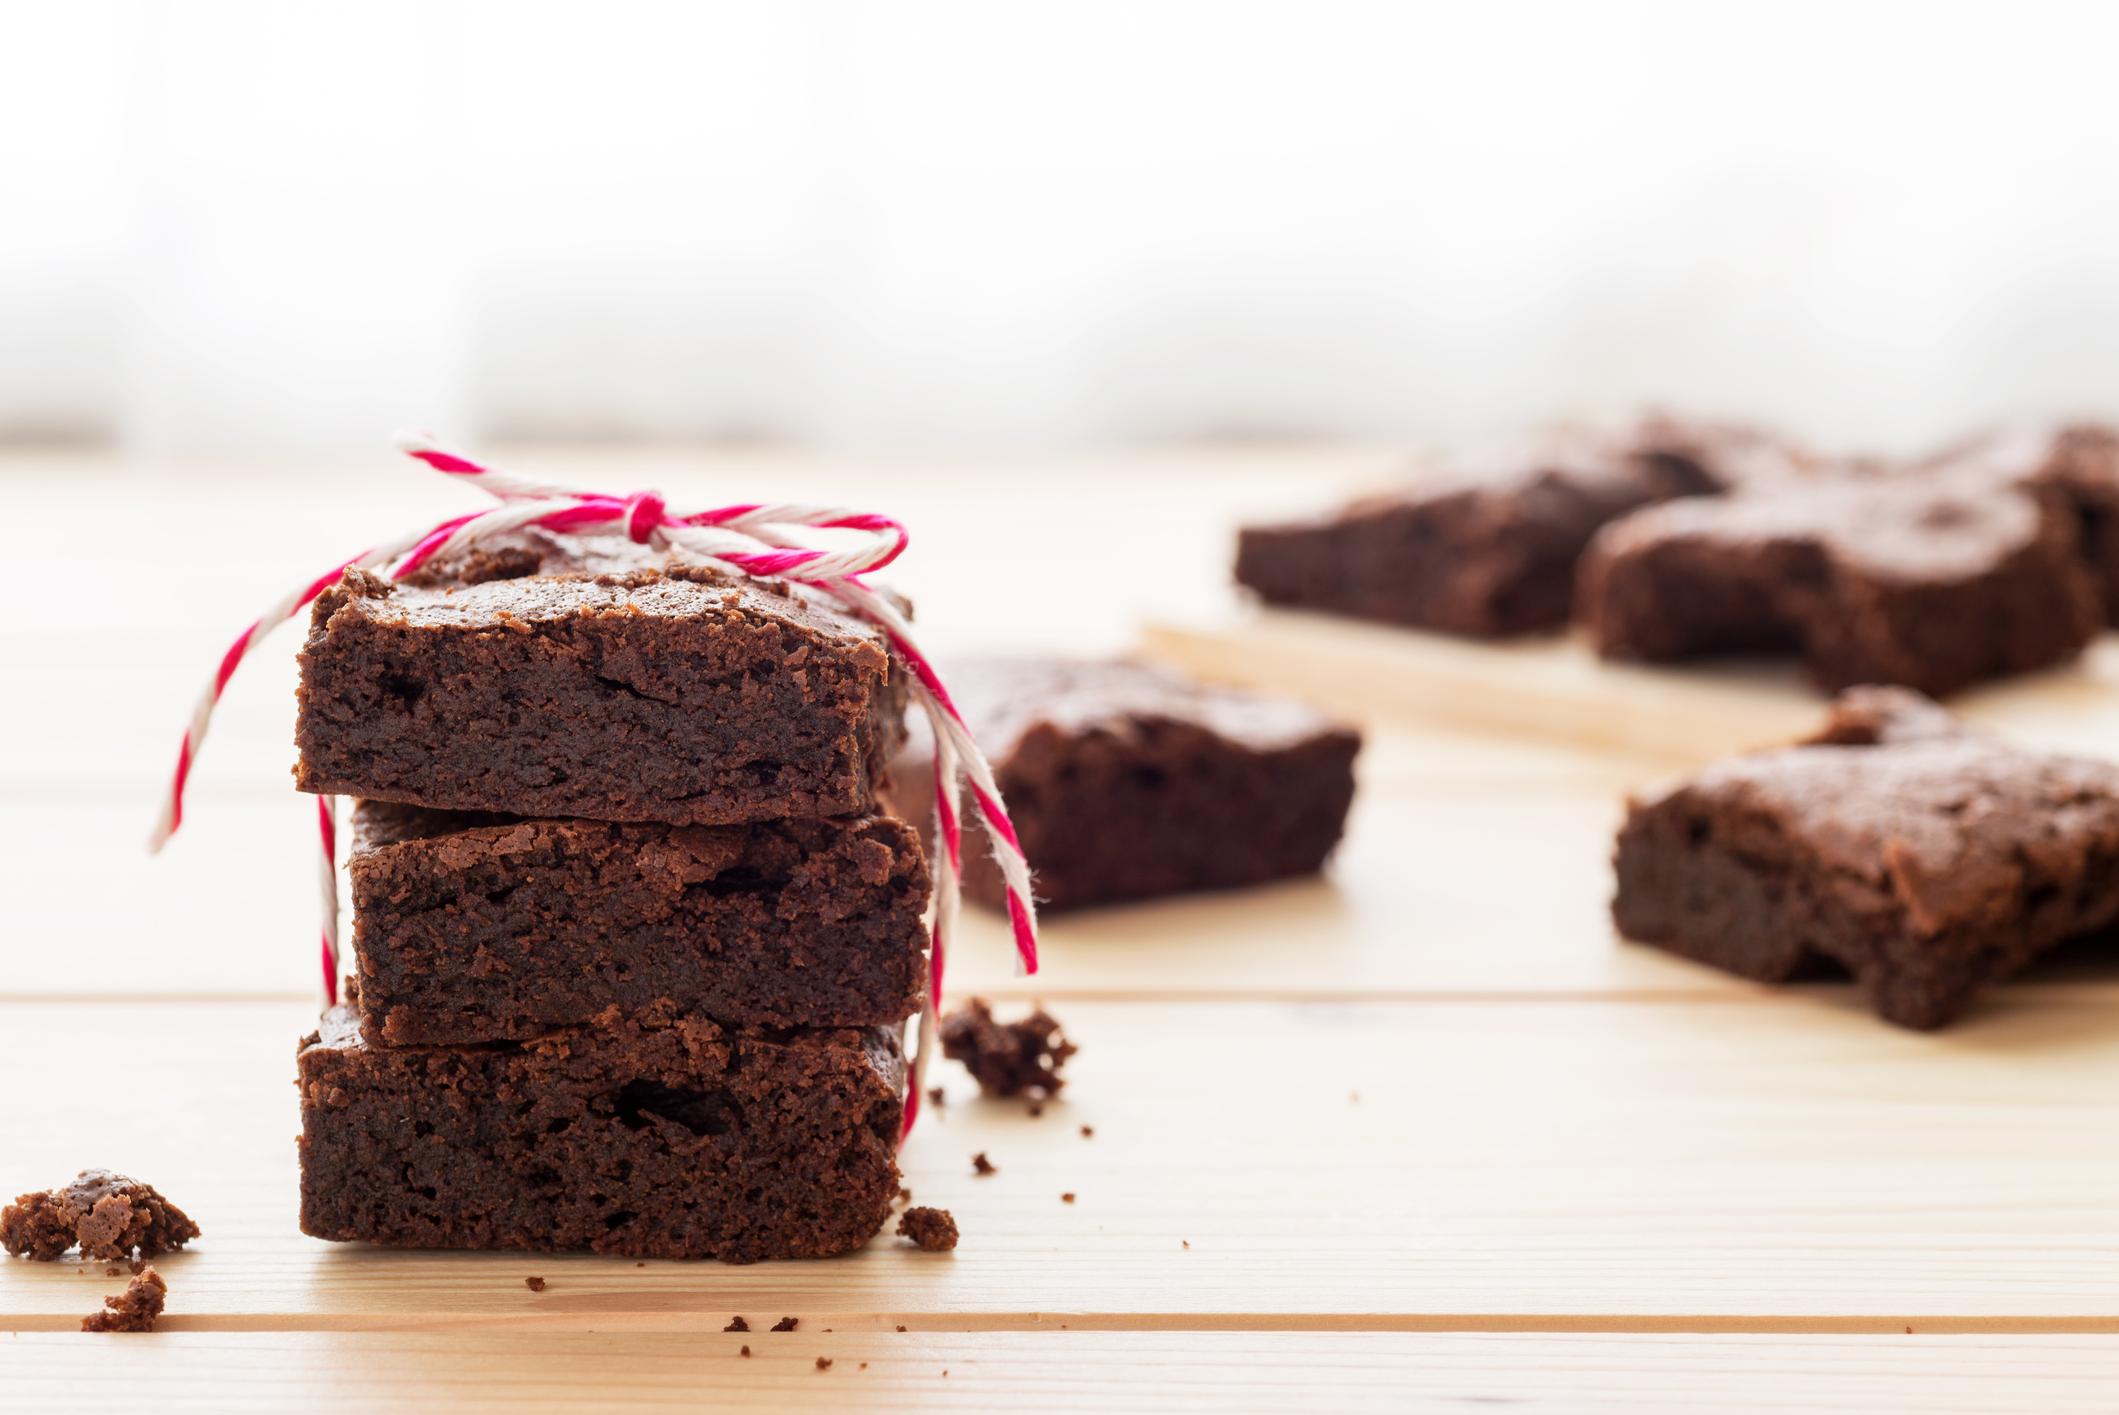 These Low-Carb, Keto Compliant Brownie Recipes Will Blow Your Mind